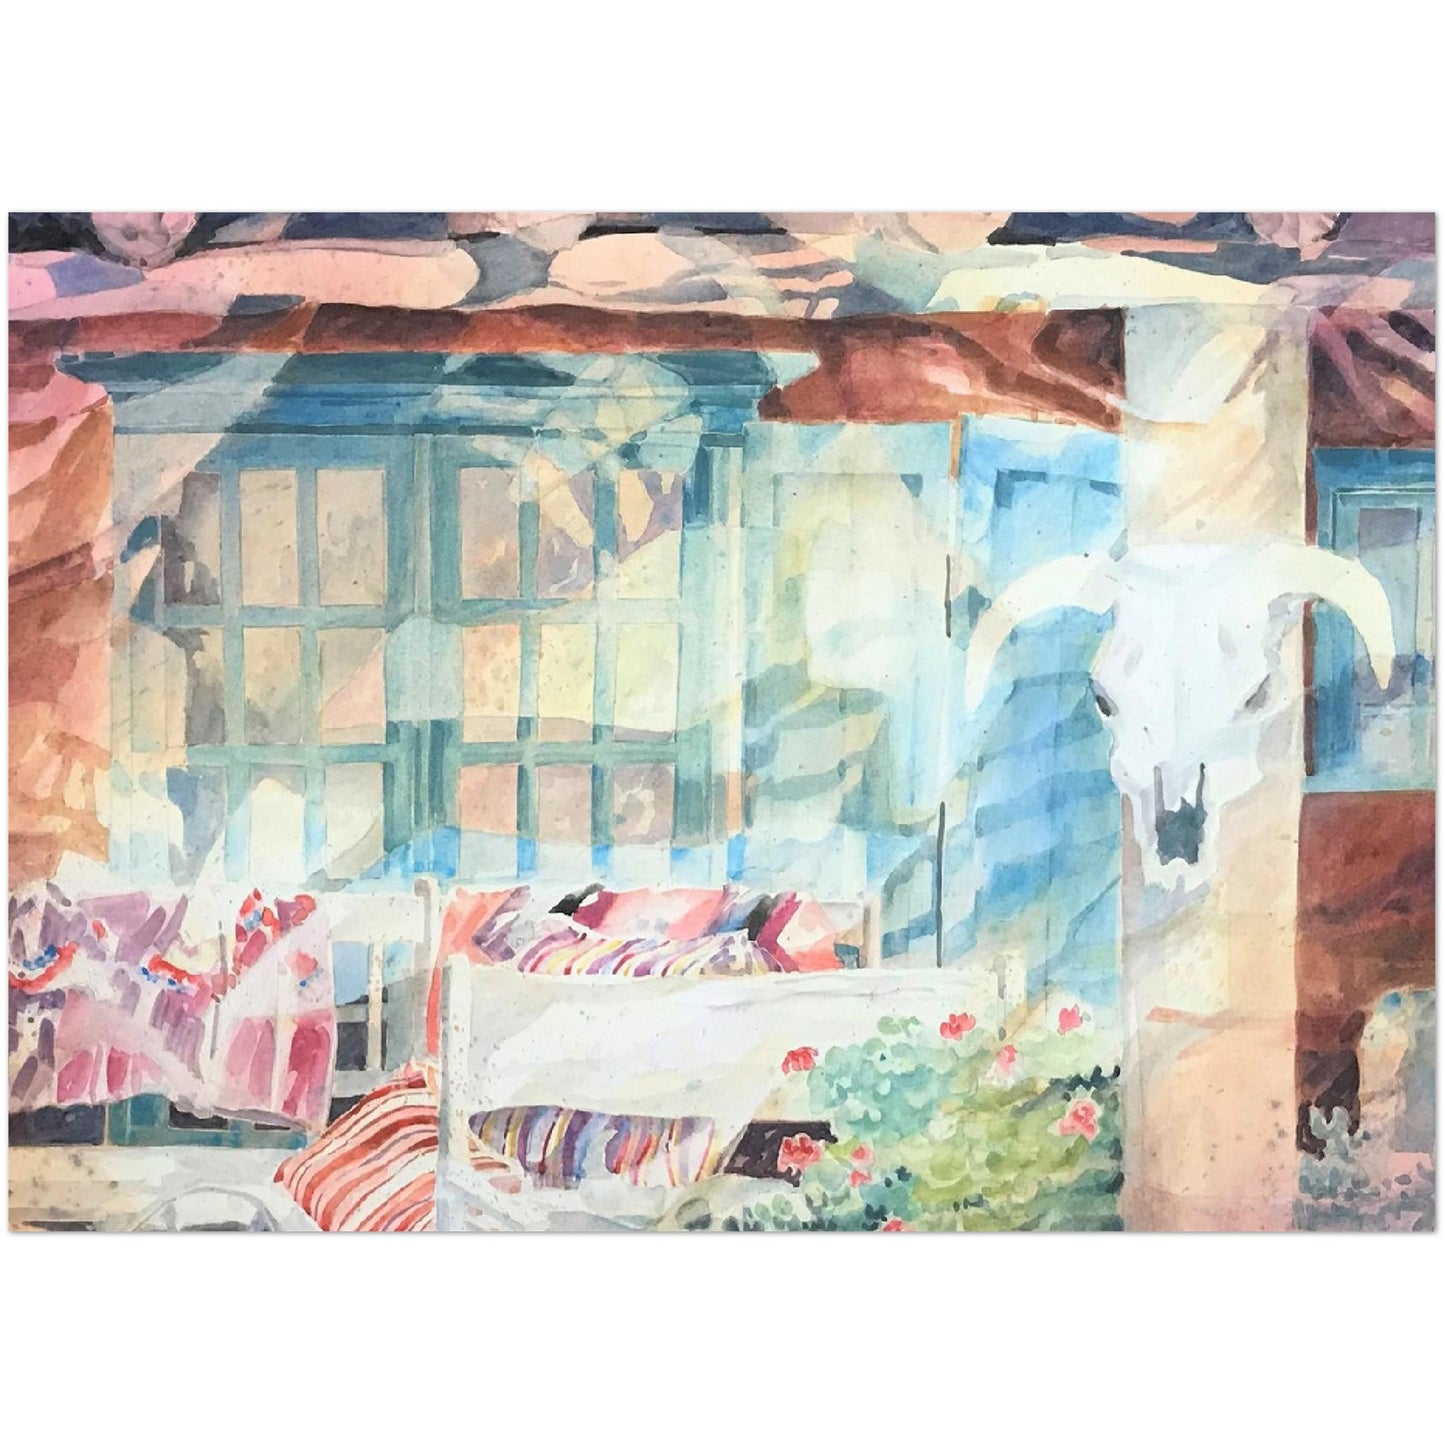 Pack of 10 postcards "Southwestern Home" Watercolor (2-sided, No envelopes, US & CA) by Barbara Cleary Designs